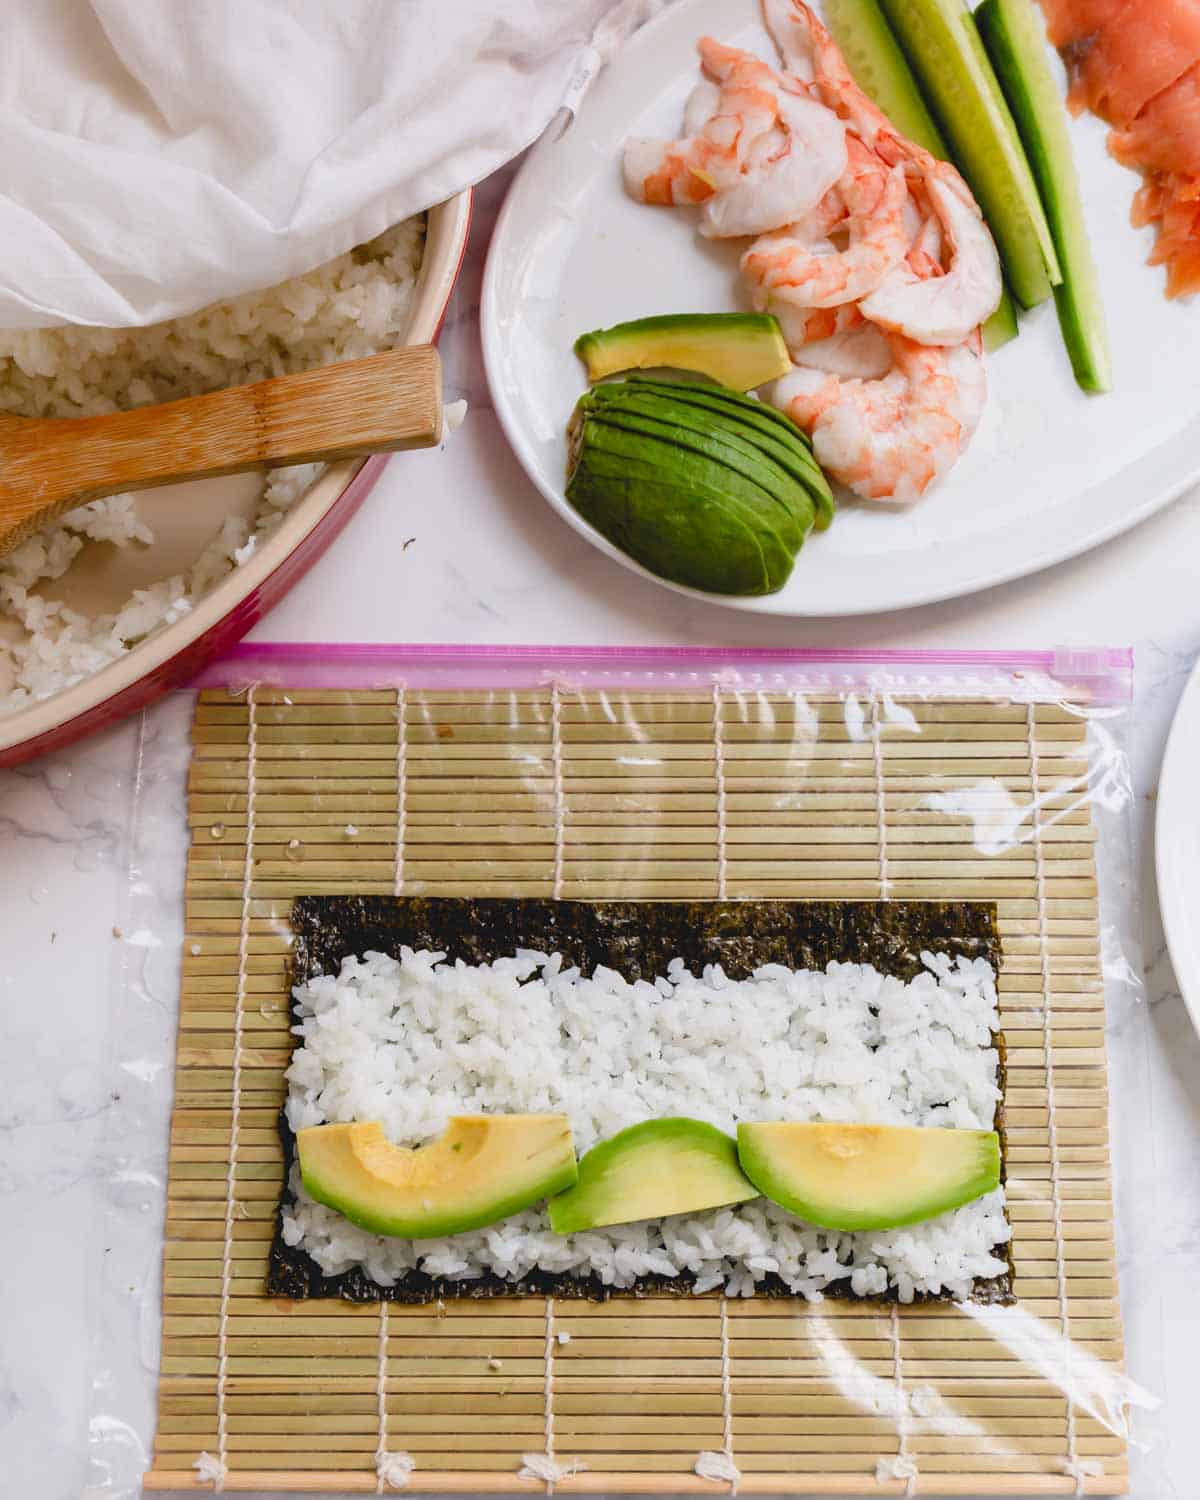 Nori sheet with rice and avocado slices on a bamboo mat.